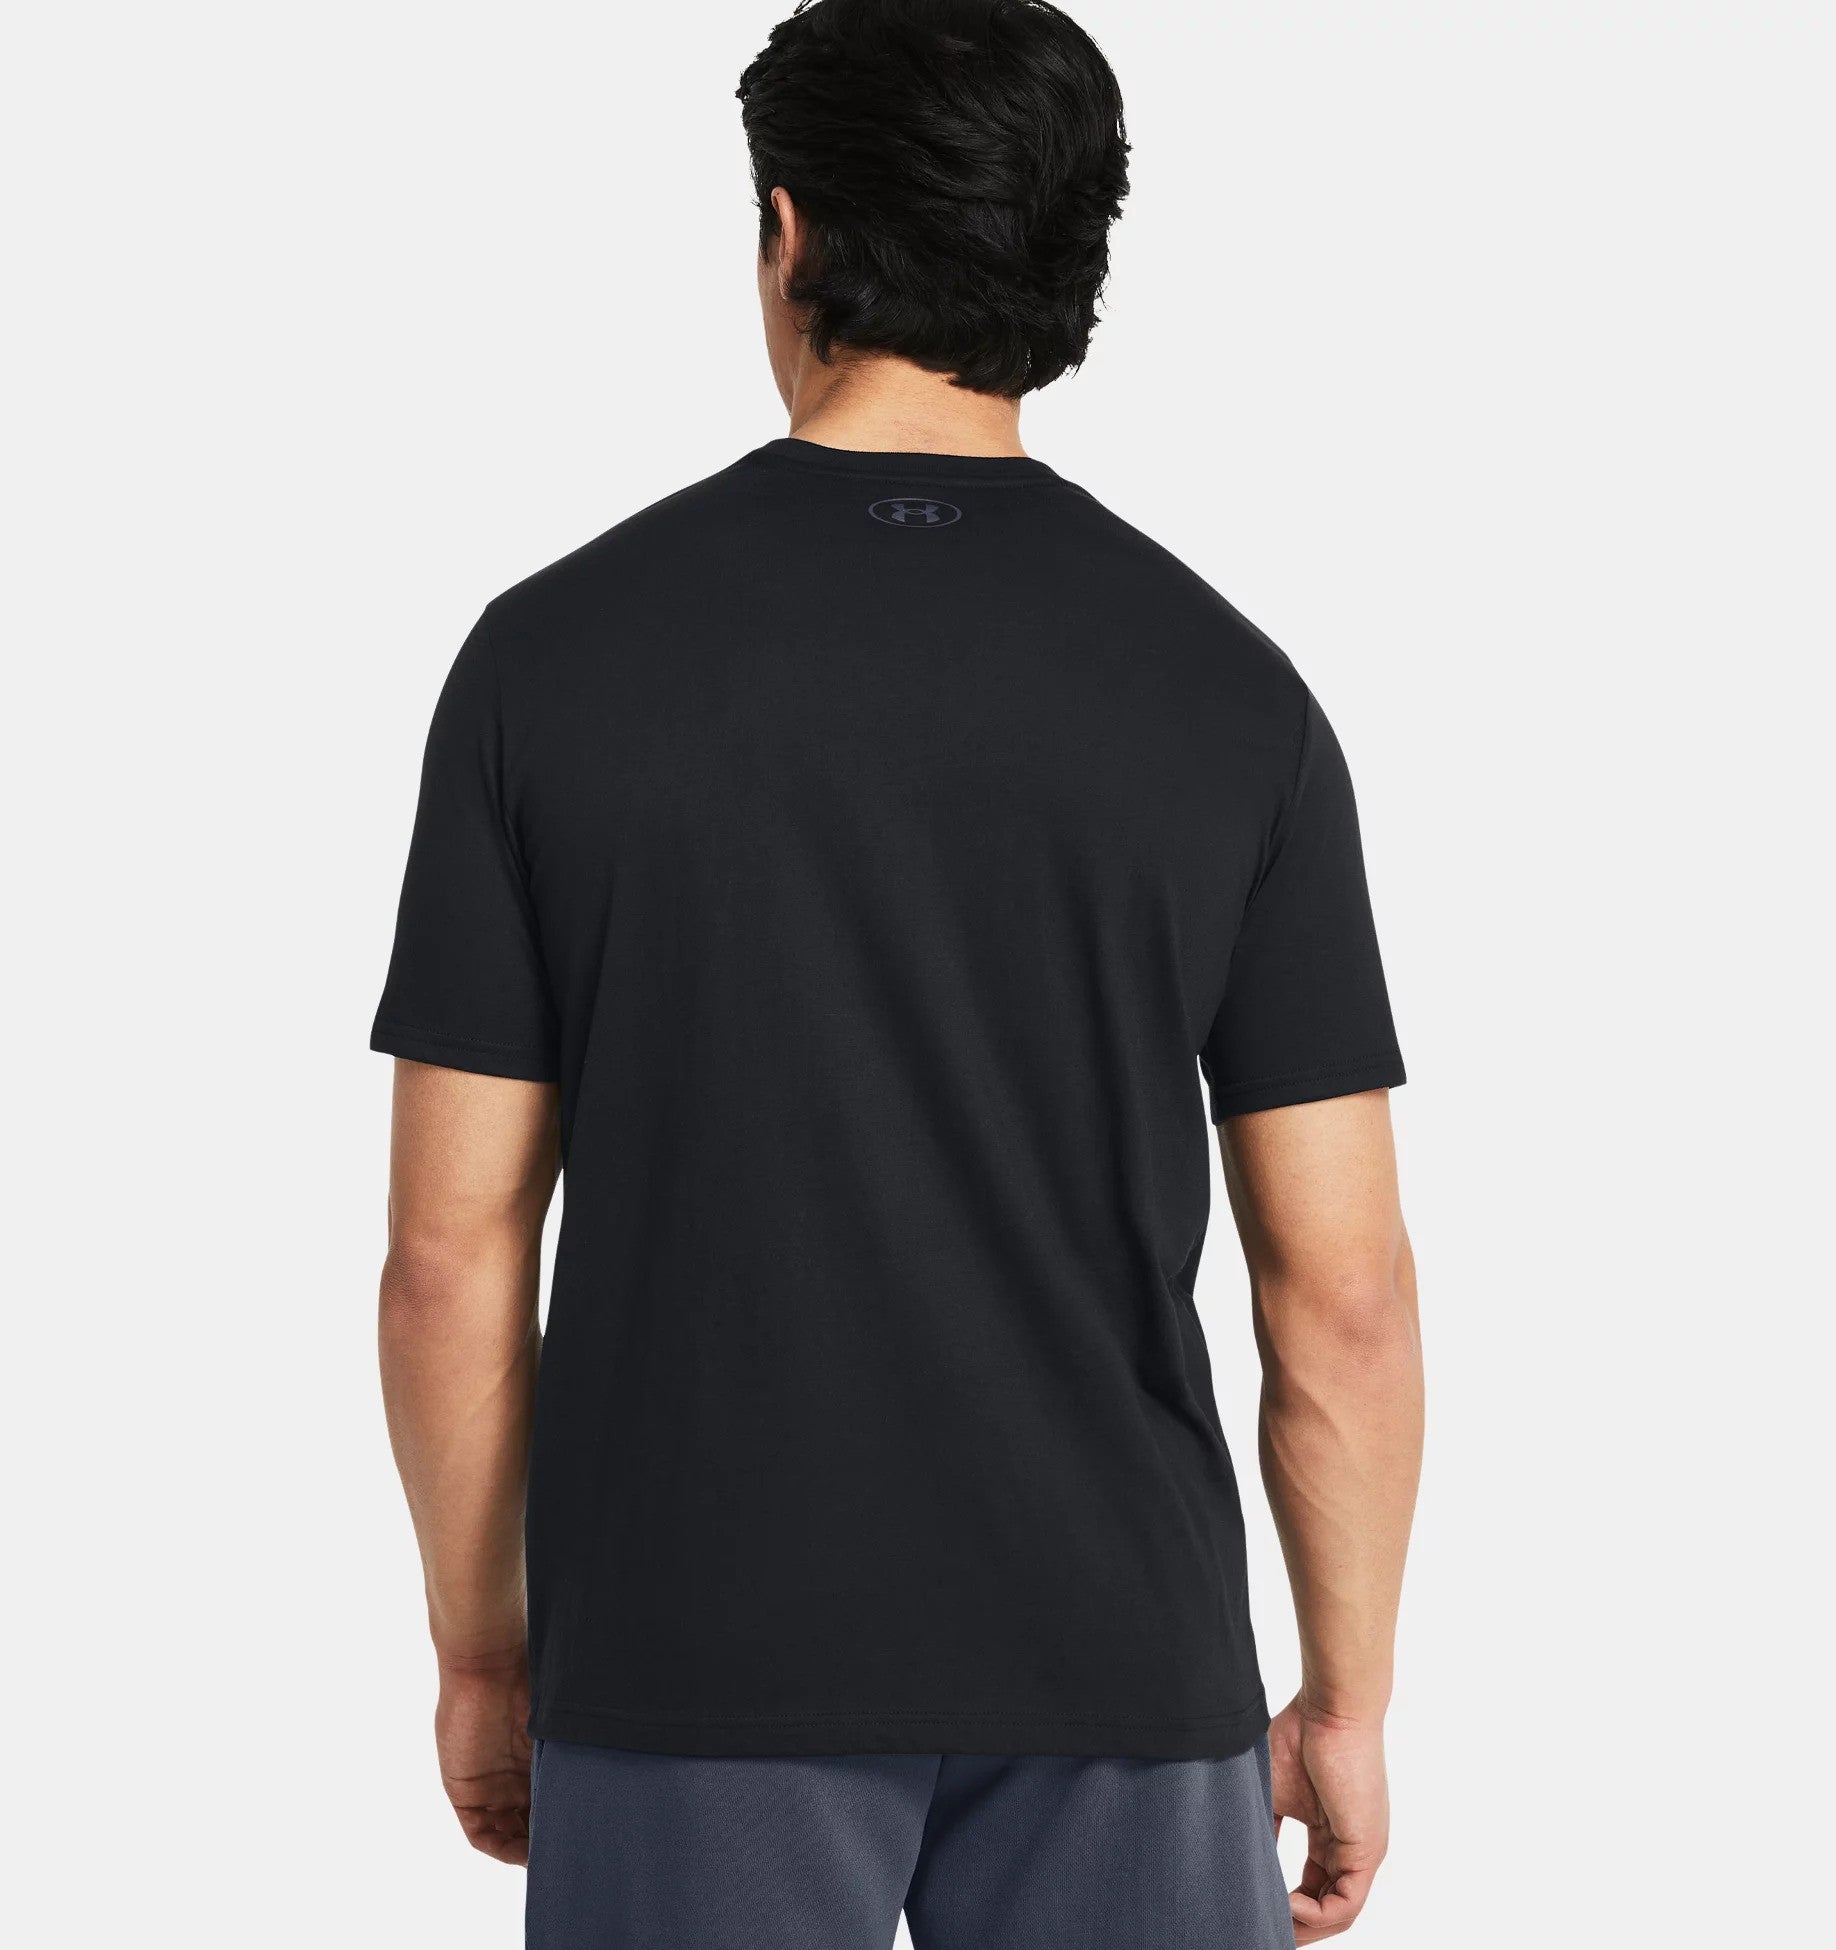 Under Armour Project Rock Payoff Graphic Tee Black/Downpour Grey